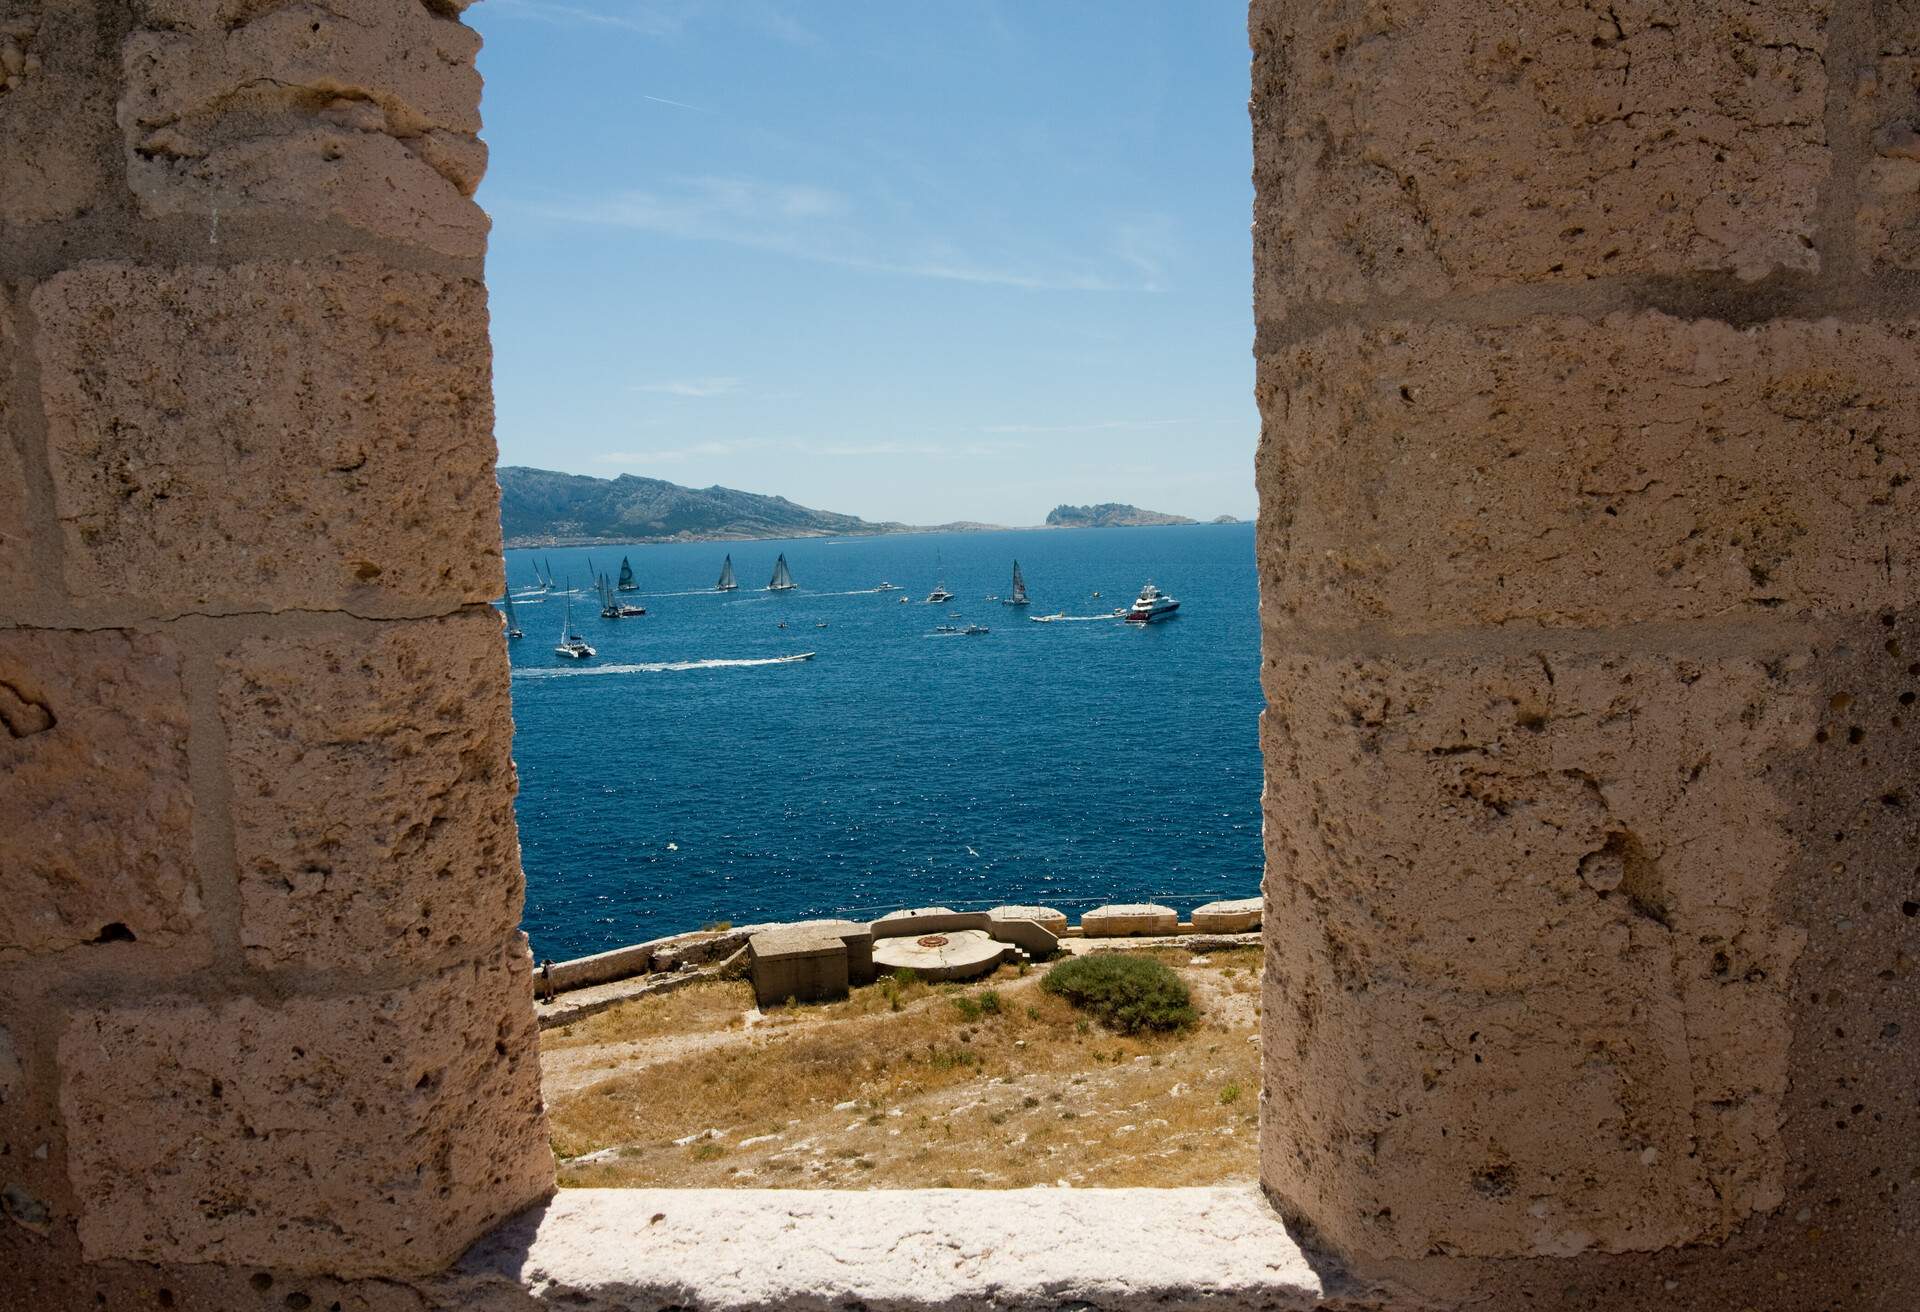 A regatta as seen from the Chateau D'if prison on an island just of Marseille France which was featured in the Count Of Monte Cristo novel